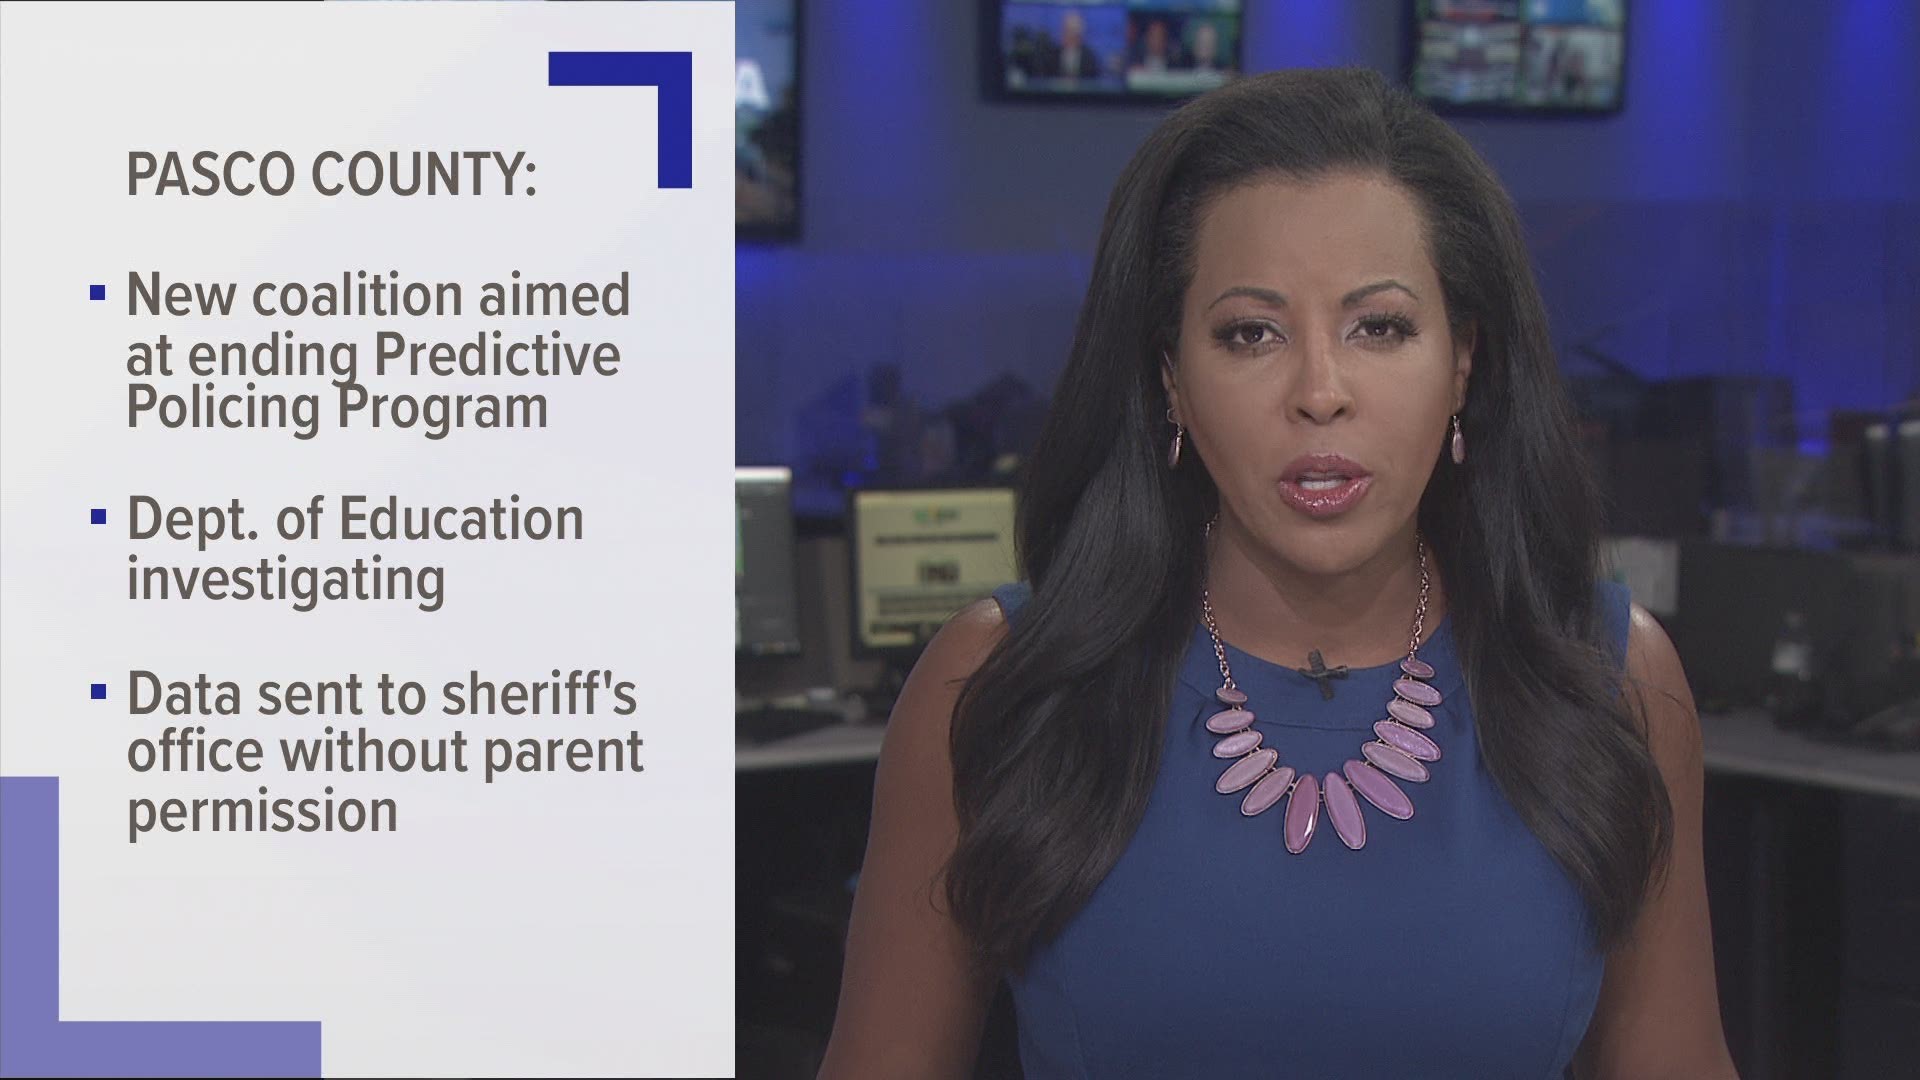 It wants the Pasco County School District to stop sharing information with the sheriff's office.